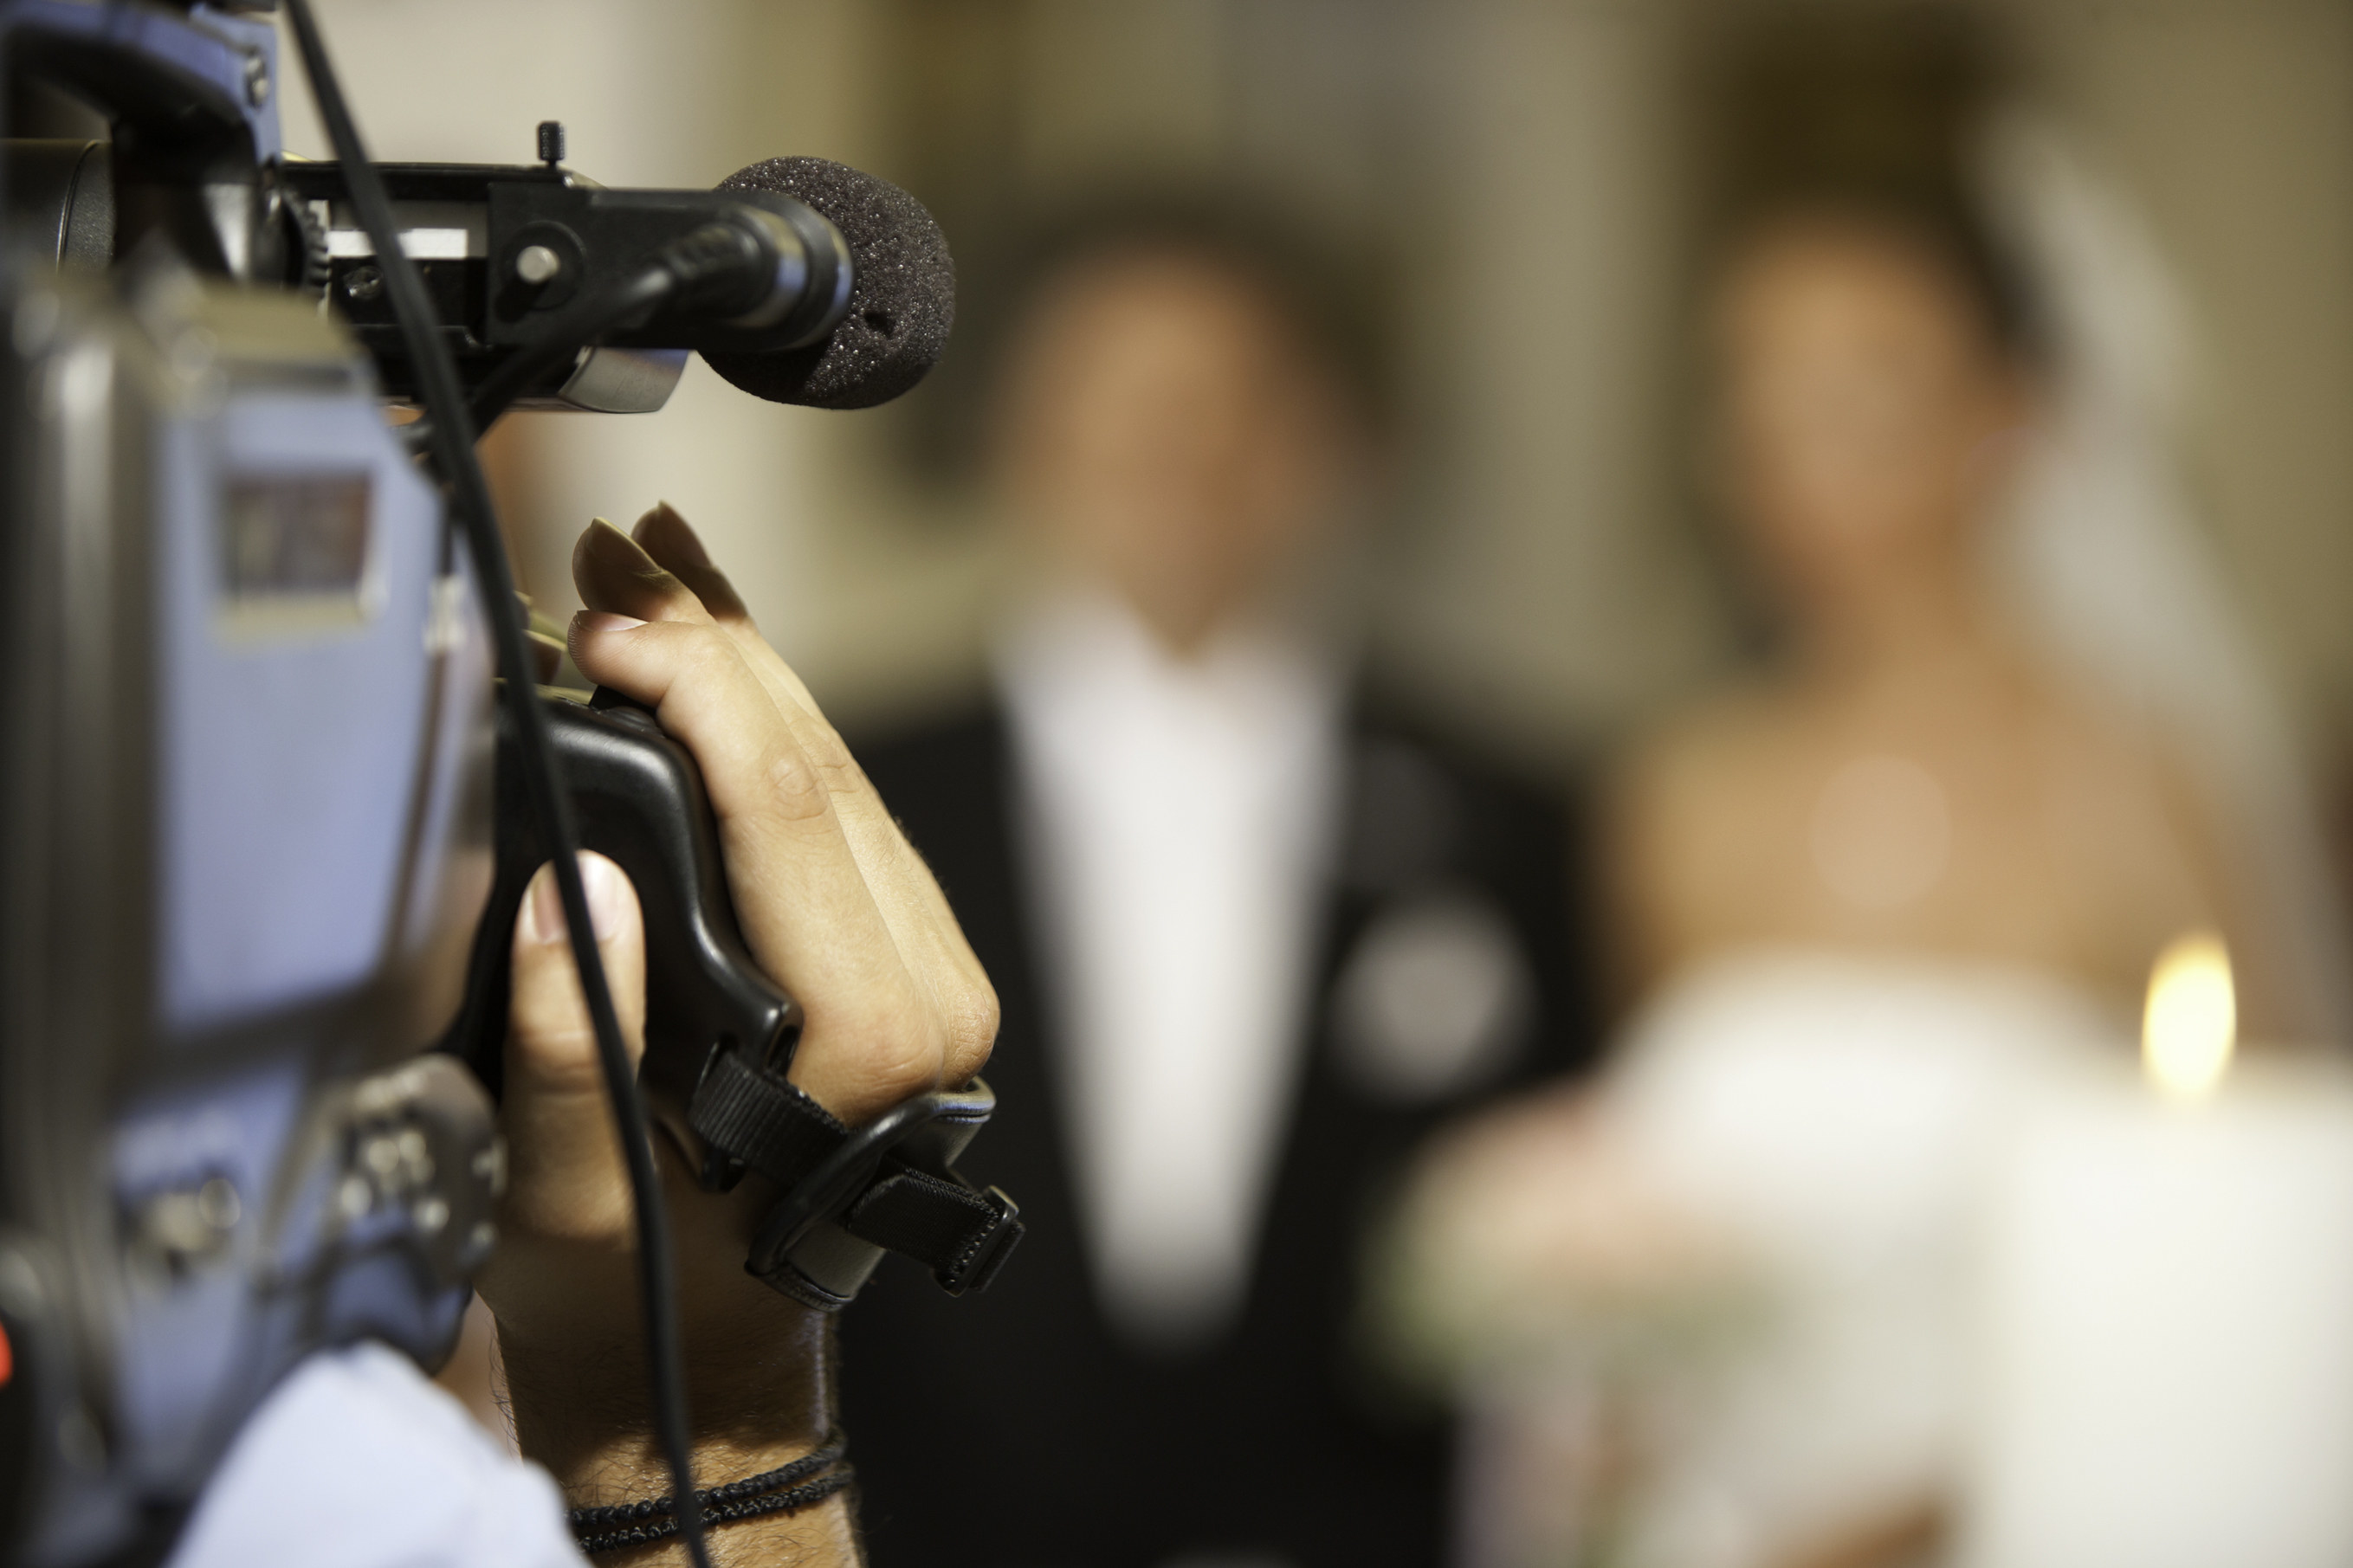 A video camera is pointed at a bride and groom